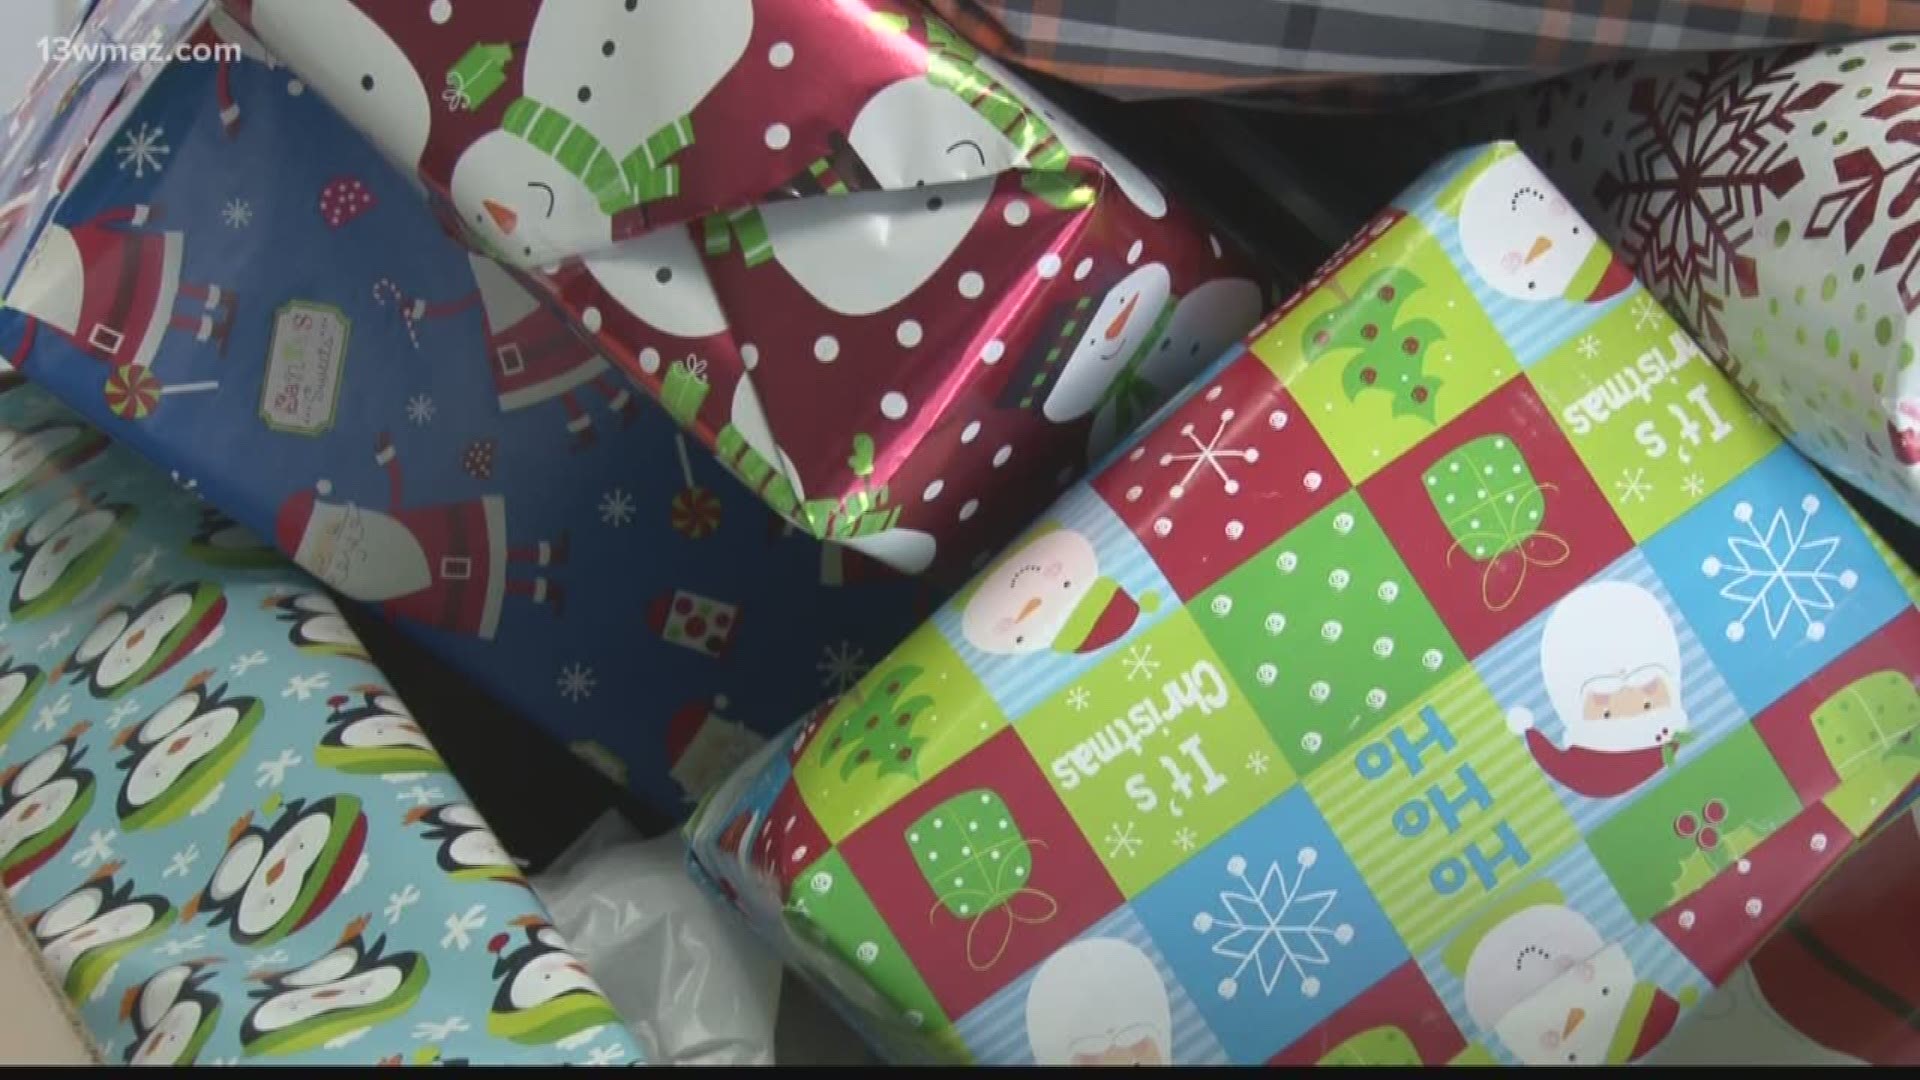 Kids Yule Love is preparing for their 34th year of giving presents to families who otherwise may not get a Christmas.